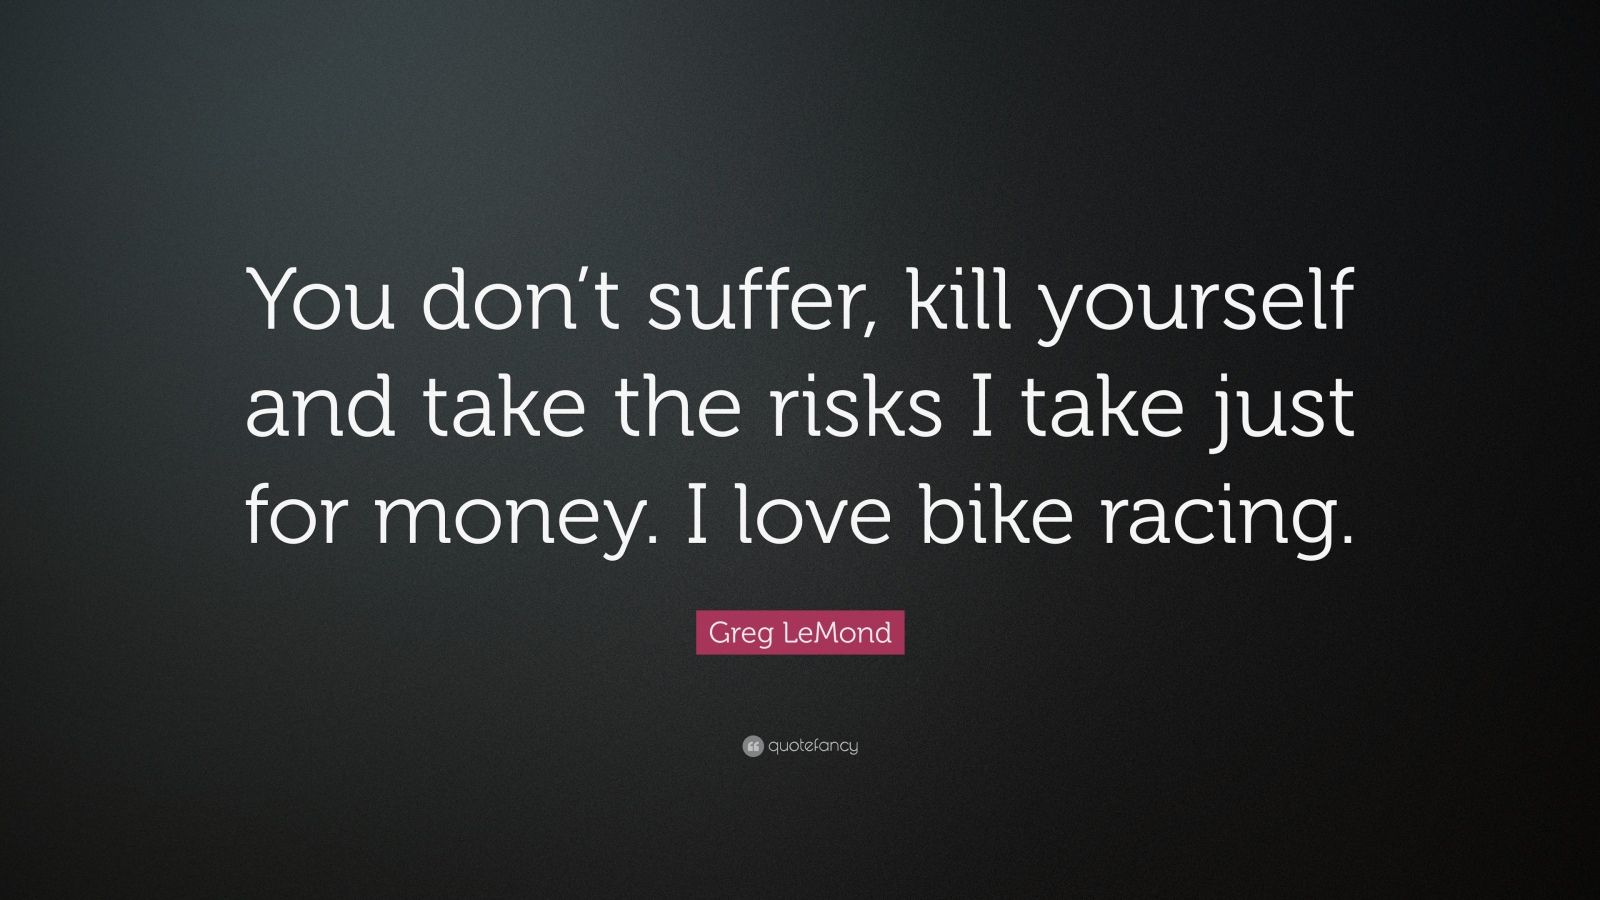 “You don’t suffer, kill yourself and take the risks I take just for money. 